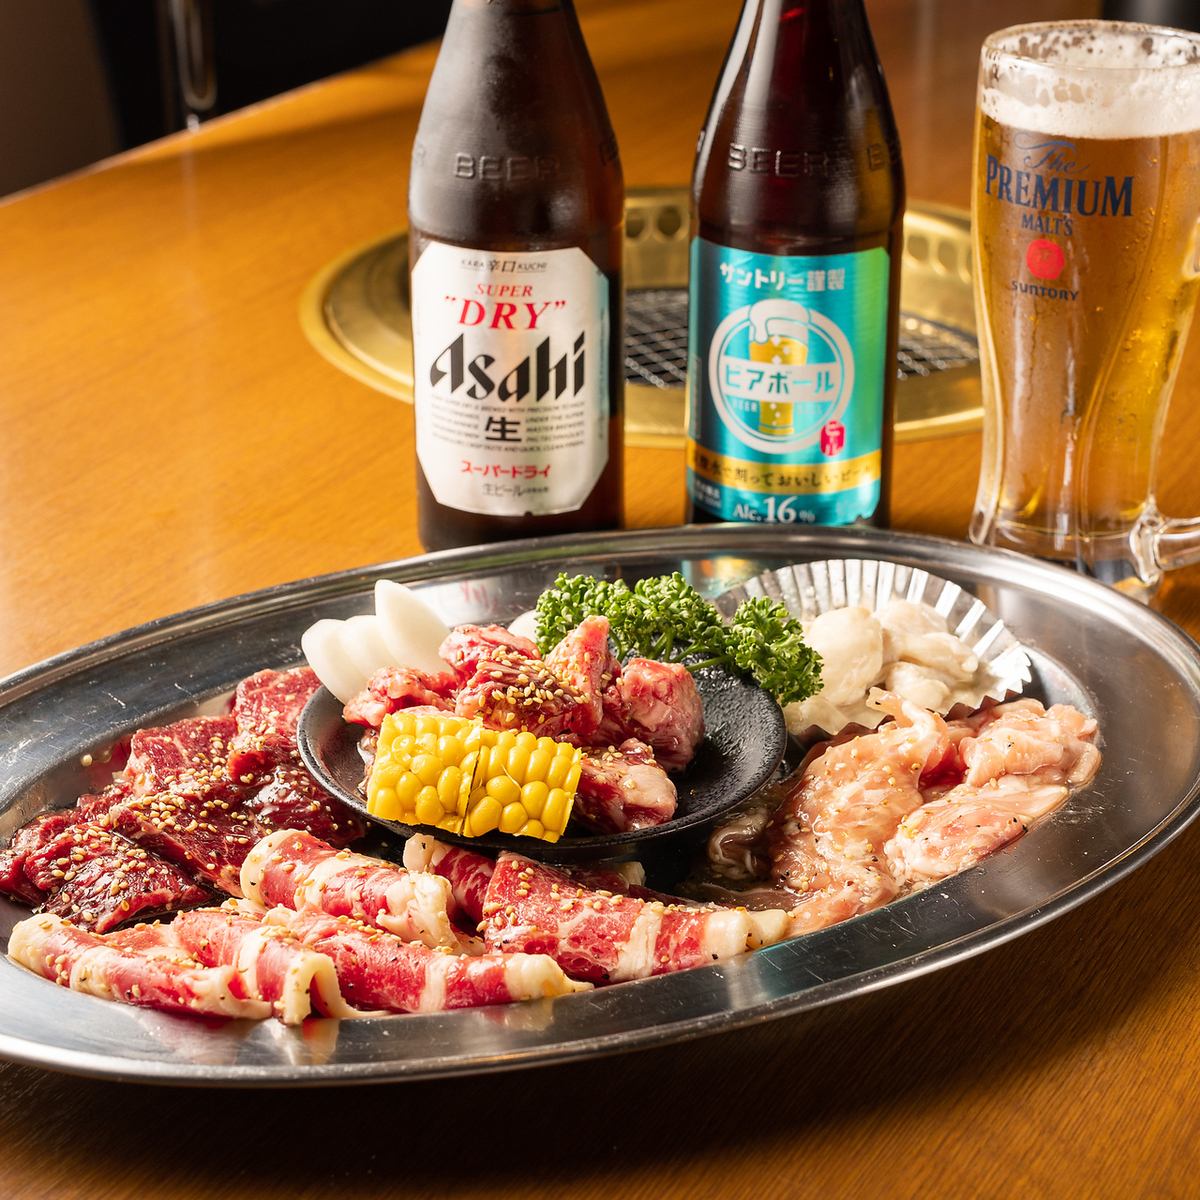 If you want to enjoy yakiniku in Tomakomai!! Complete with tatami room private room, Nikuki is the place to relax in a cozy atmosphere♪